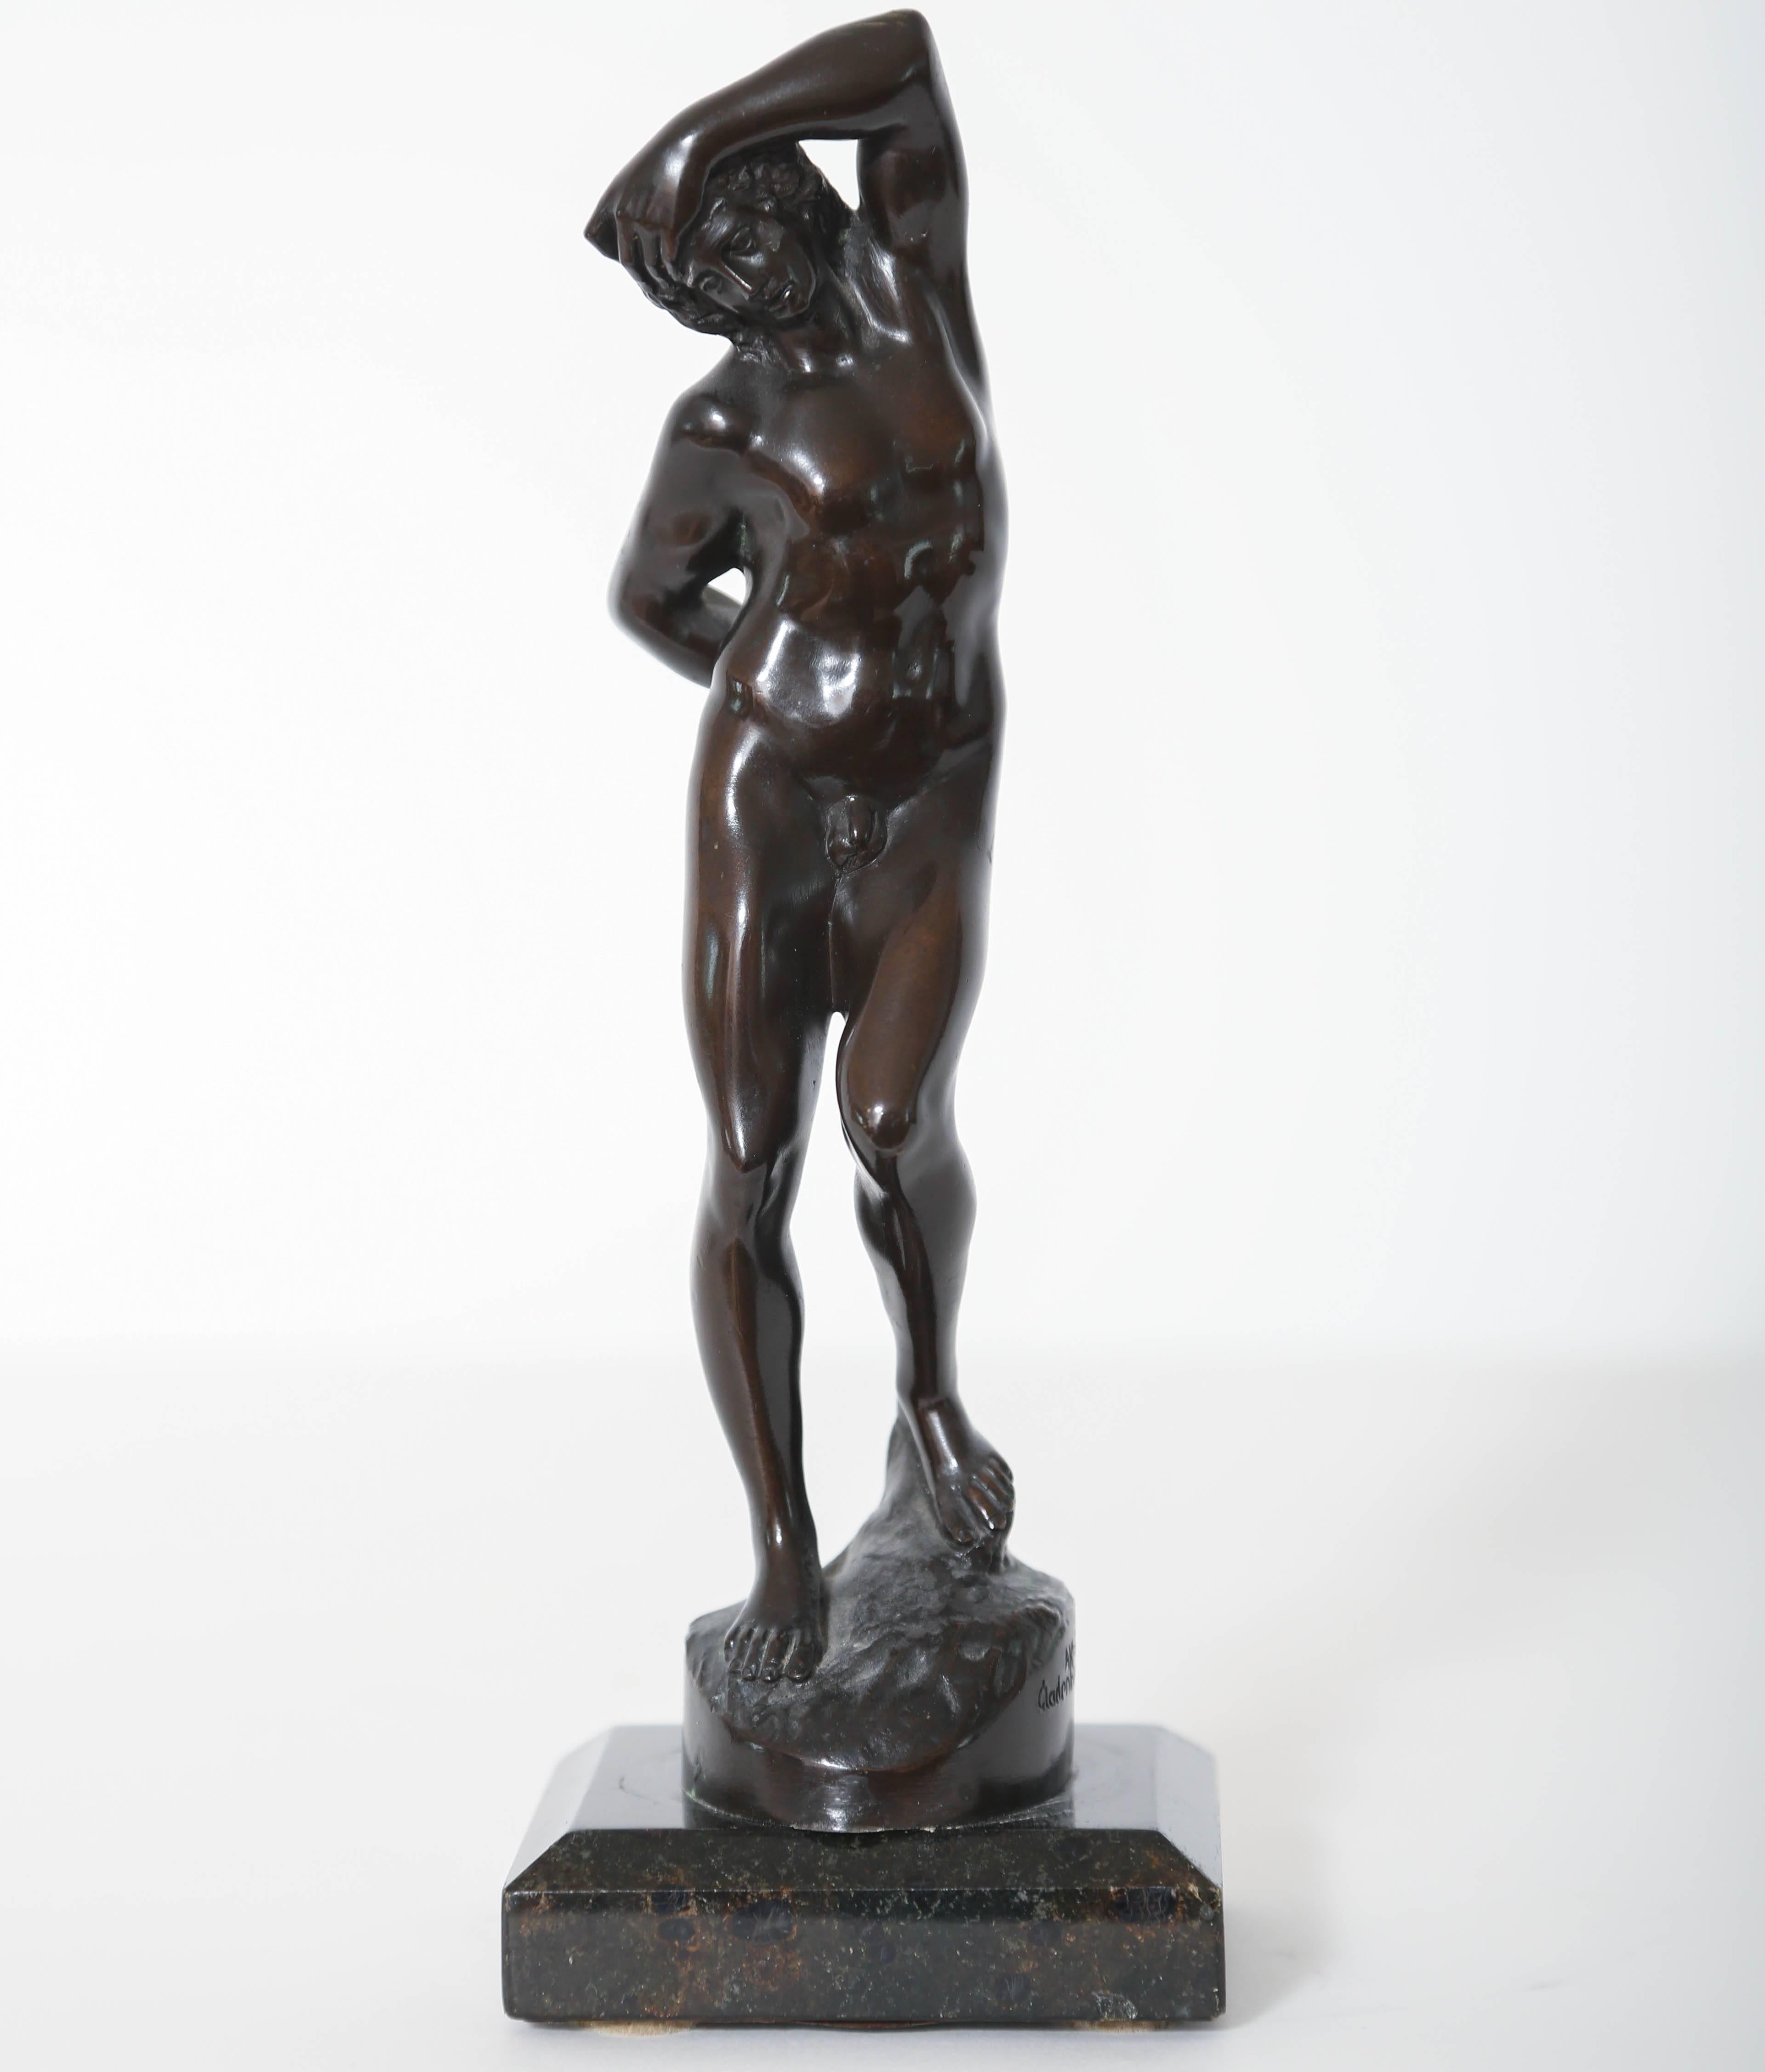 This cast bronze model of a nude youth, probably Narcissus, after Barthelmy Prieur (1536-1611) was made in Germany, circa 1900. Mounted on marble base.

Signed Akt(ien) Gesellschaft Gladenbeck Berlin. This foundry was active in Berlin from